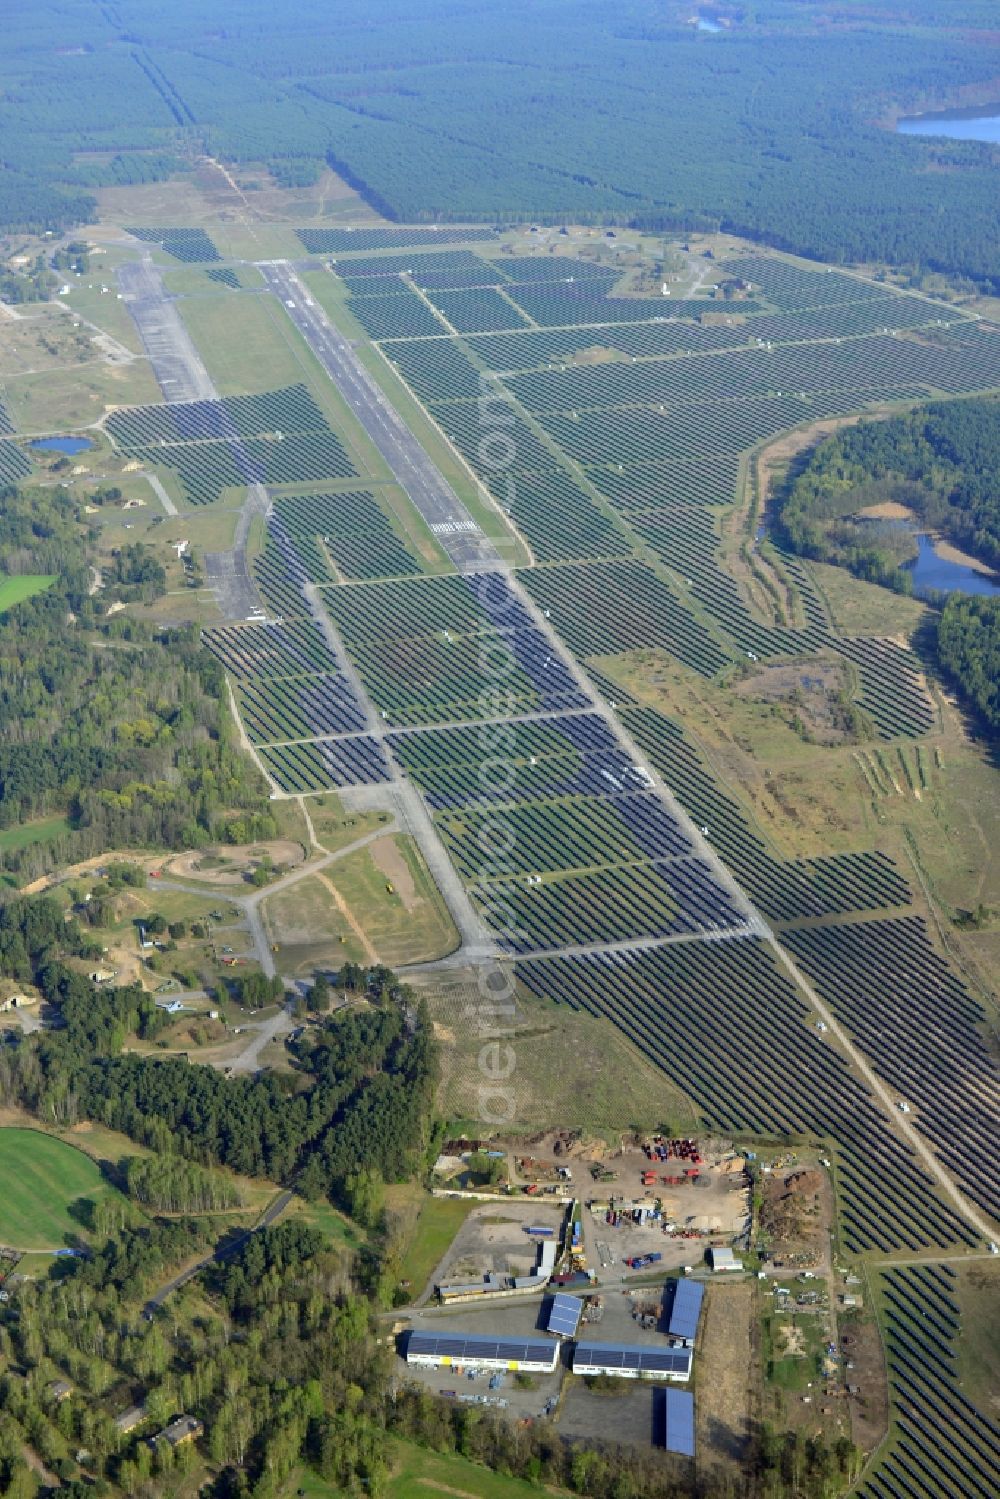 Eberswalde from above - View of the almost fully assembled solar fields of the new solar power plant Finow Tower. The hybrid solar AG is currently building on the former military airport, a solar power plant